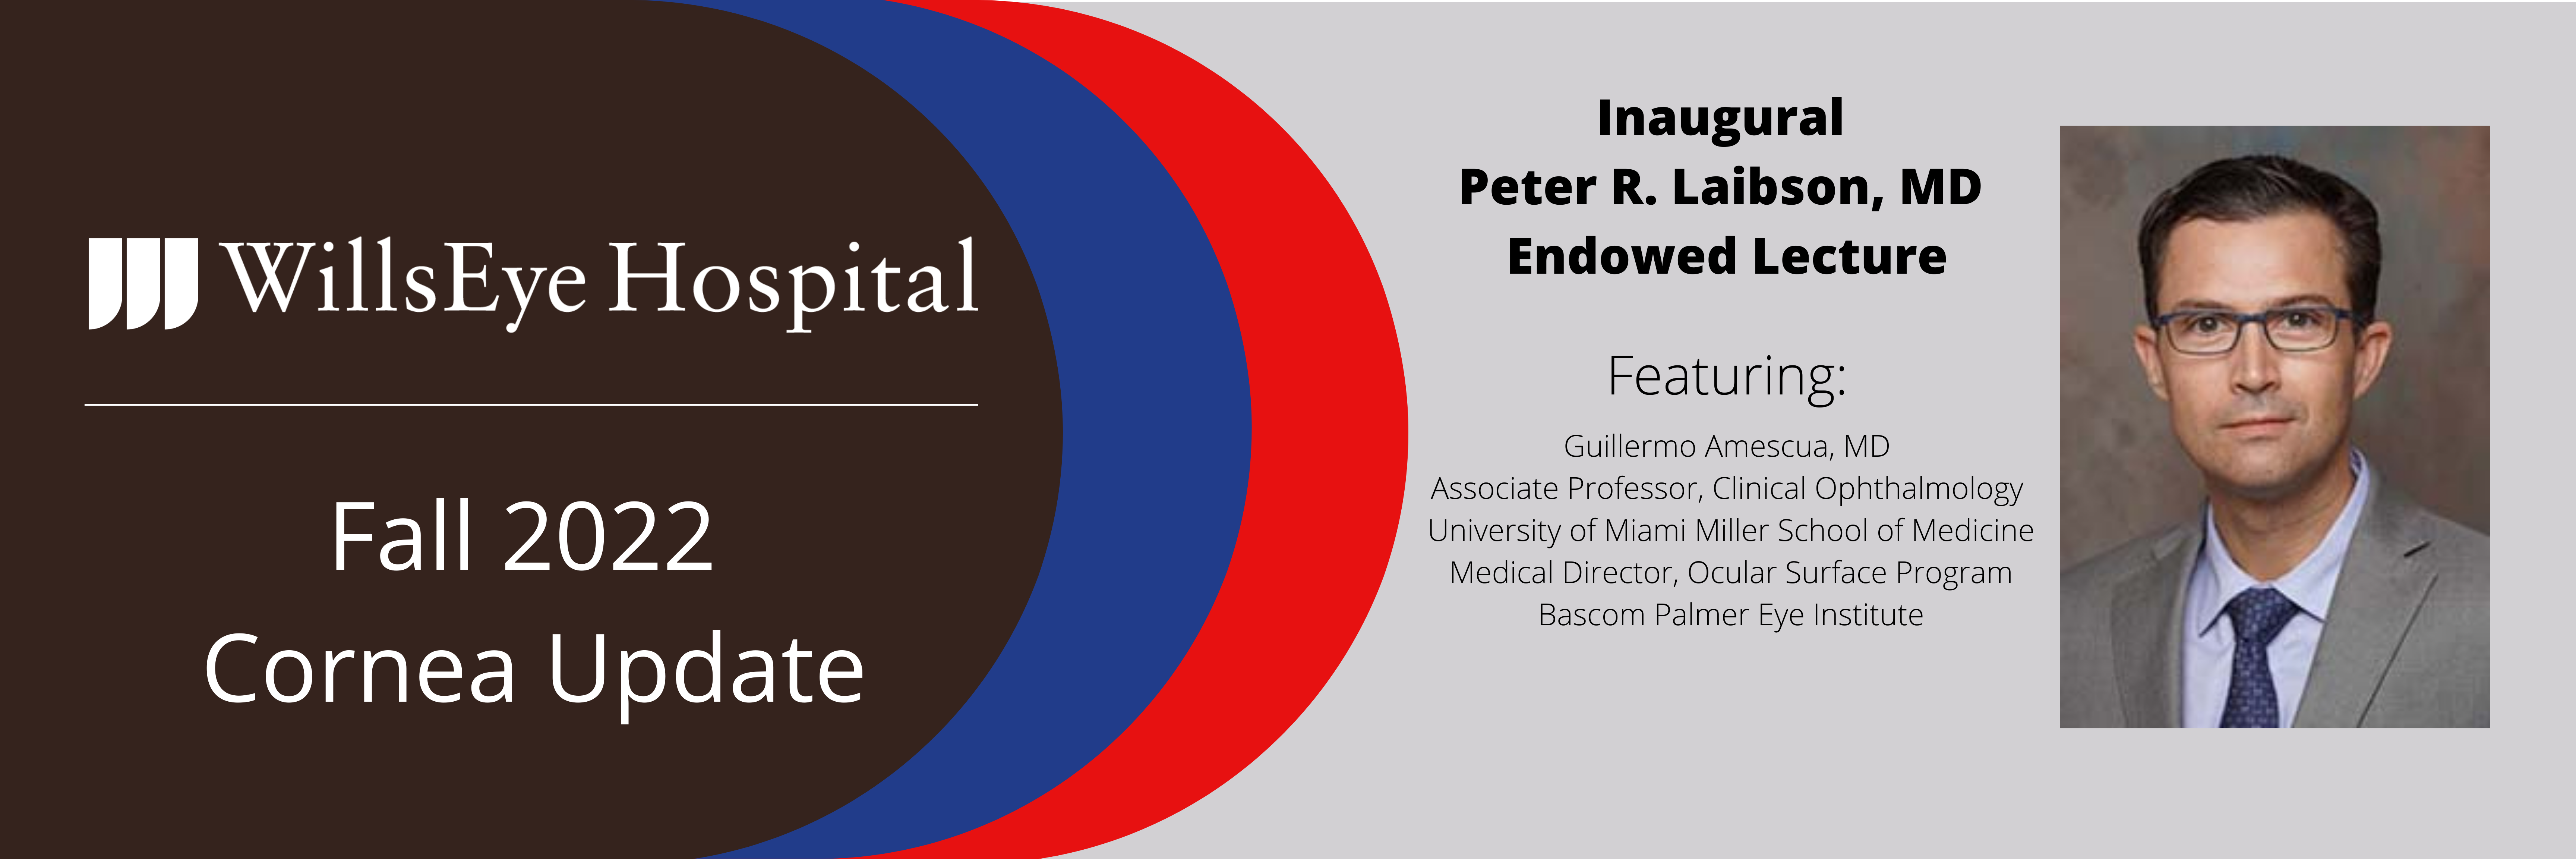 Fall Cornea Update - Feat. the Peter R. Laibson, MD Endowed Lecture (10/29/2022 @ 8 a.m. ET) Banner